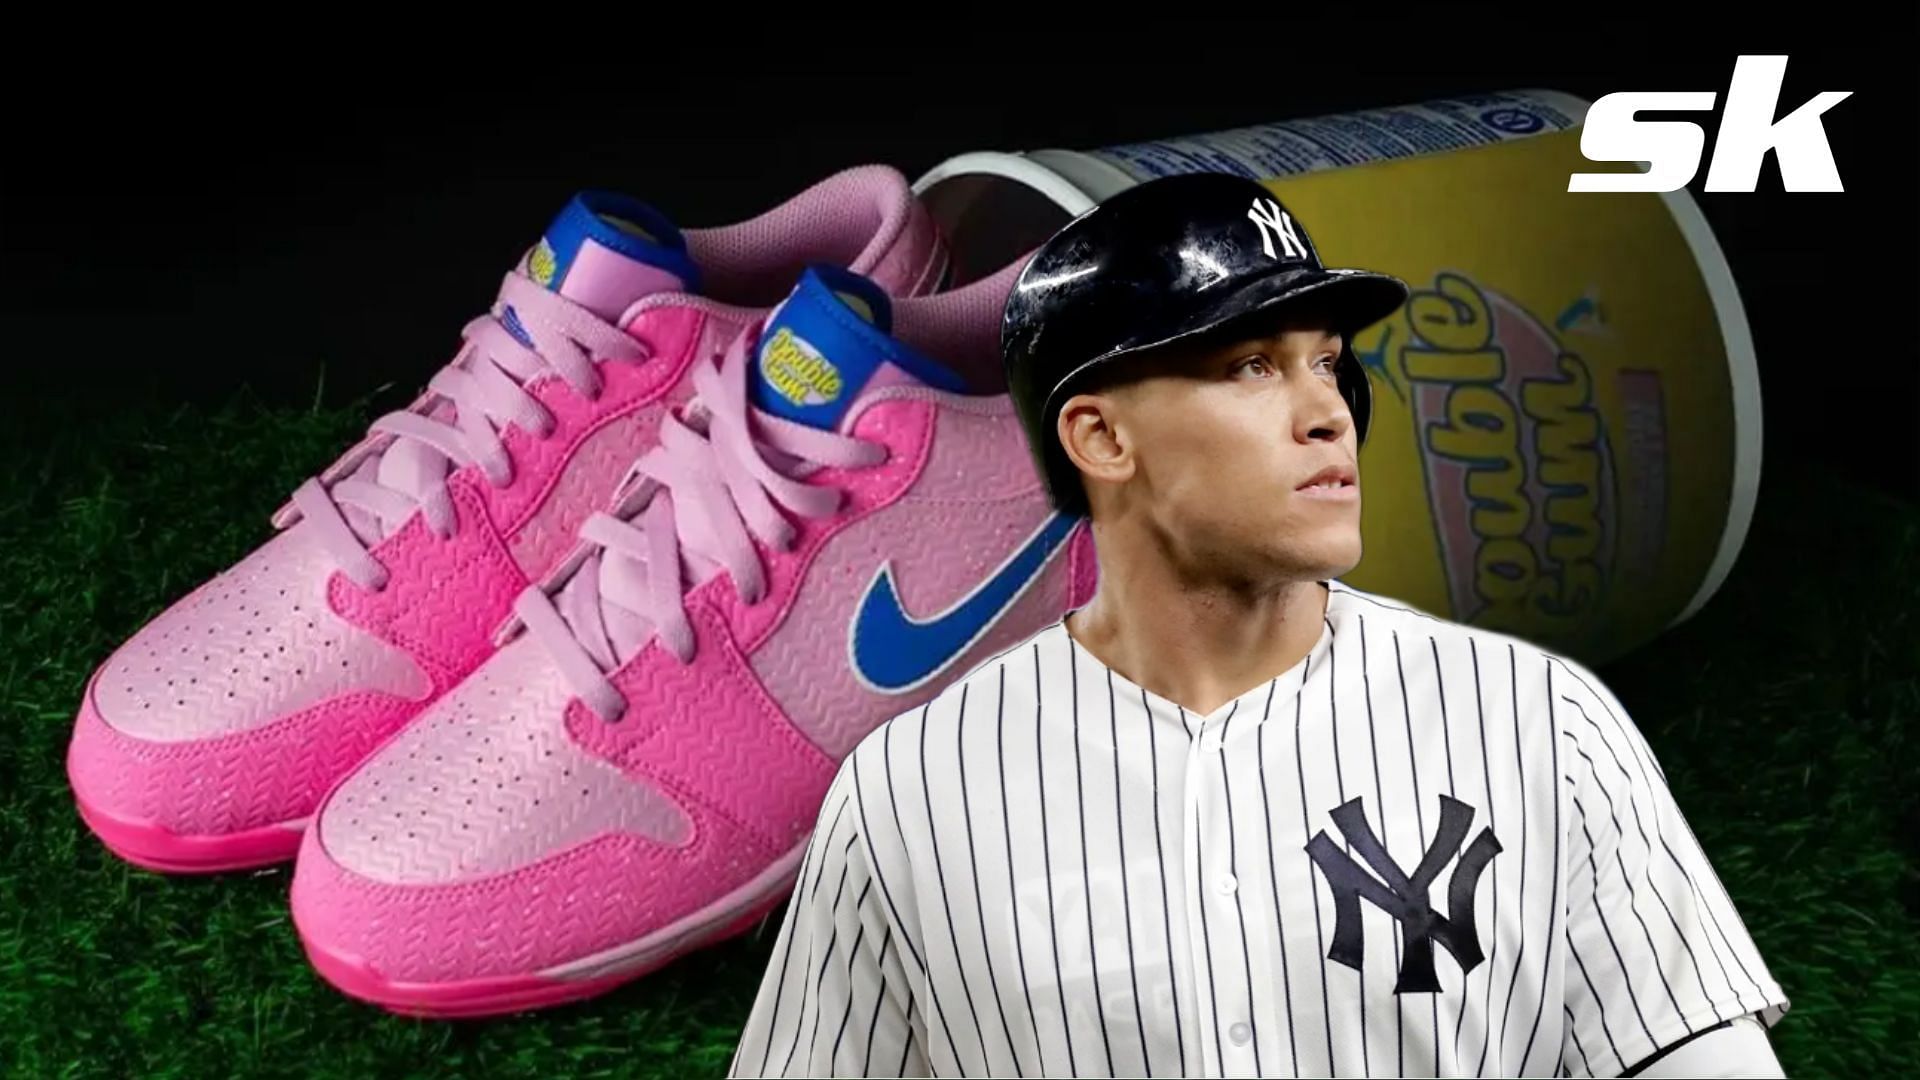 Jordan Brand's Baseball Athletes Share Their Cleats for the New